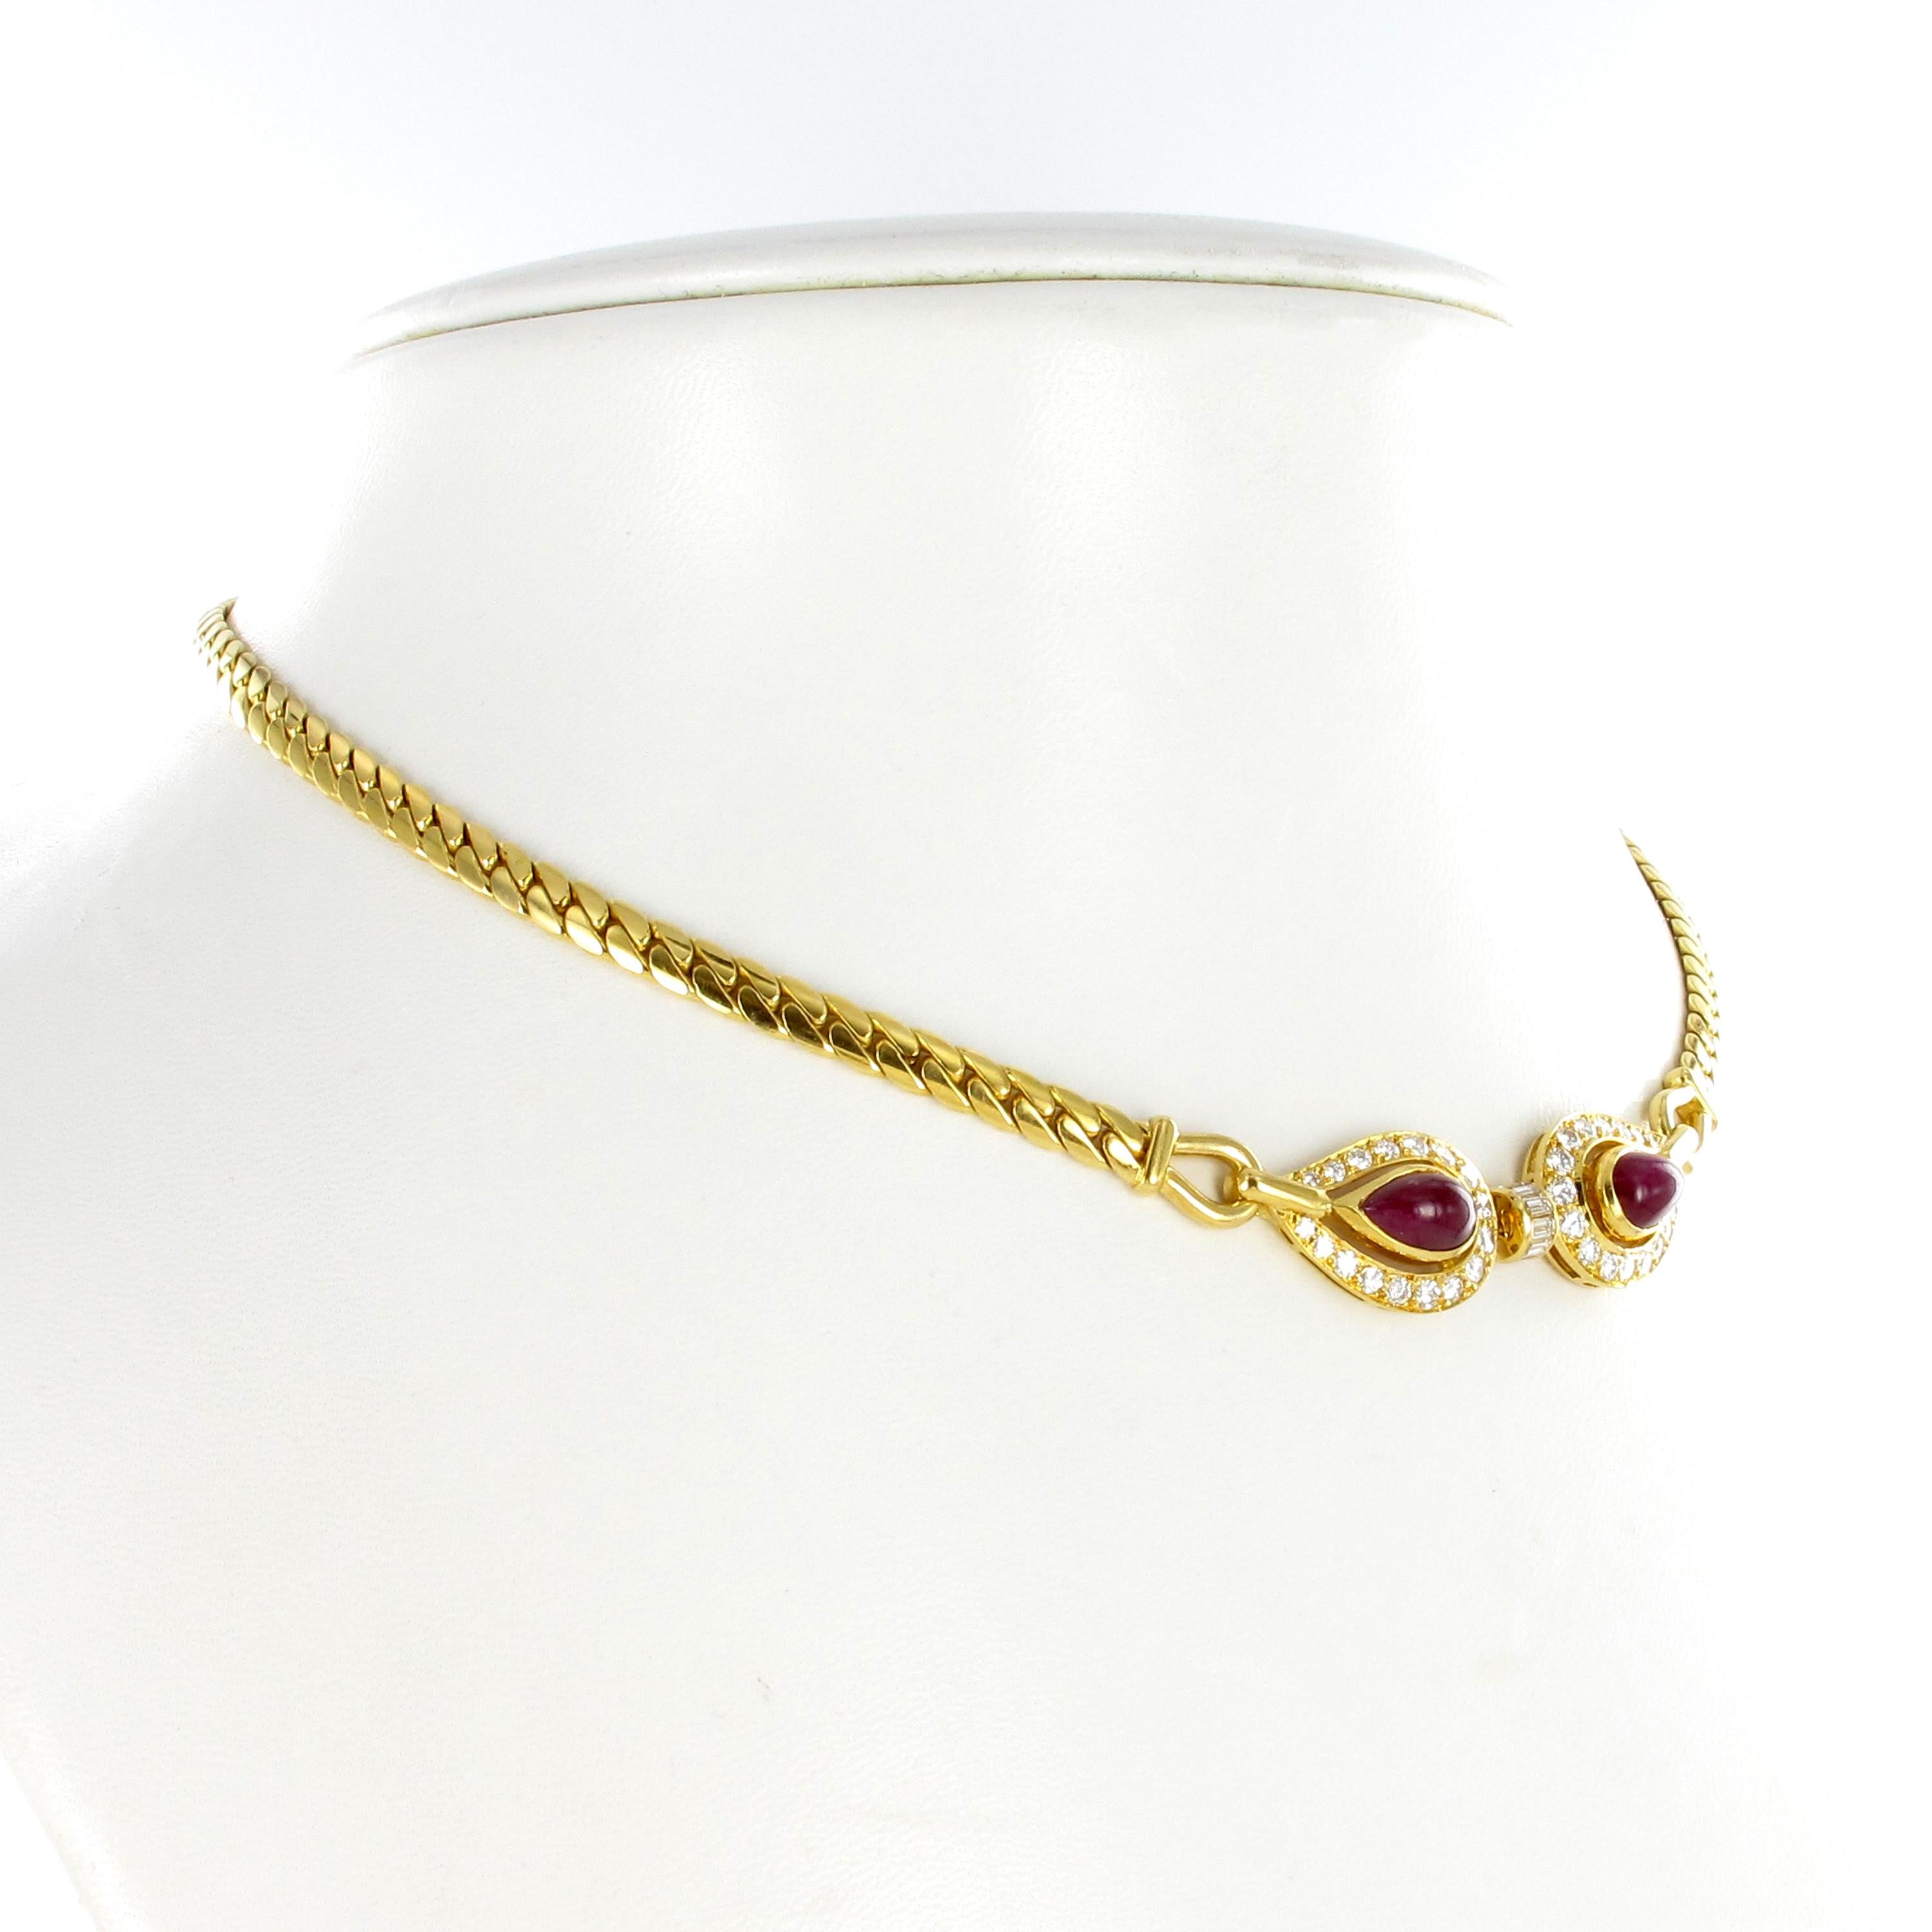 This elegant necklace by Cartier Paris features two pear shaped cabochon rubies of approximately 3.20 carats total weight. Accented by 34 brilliant cut diamonds of F/H color and vs clarity, total weight approximately 0.64 carats, and 6 baguette